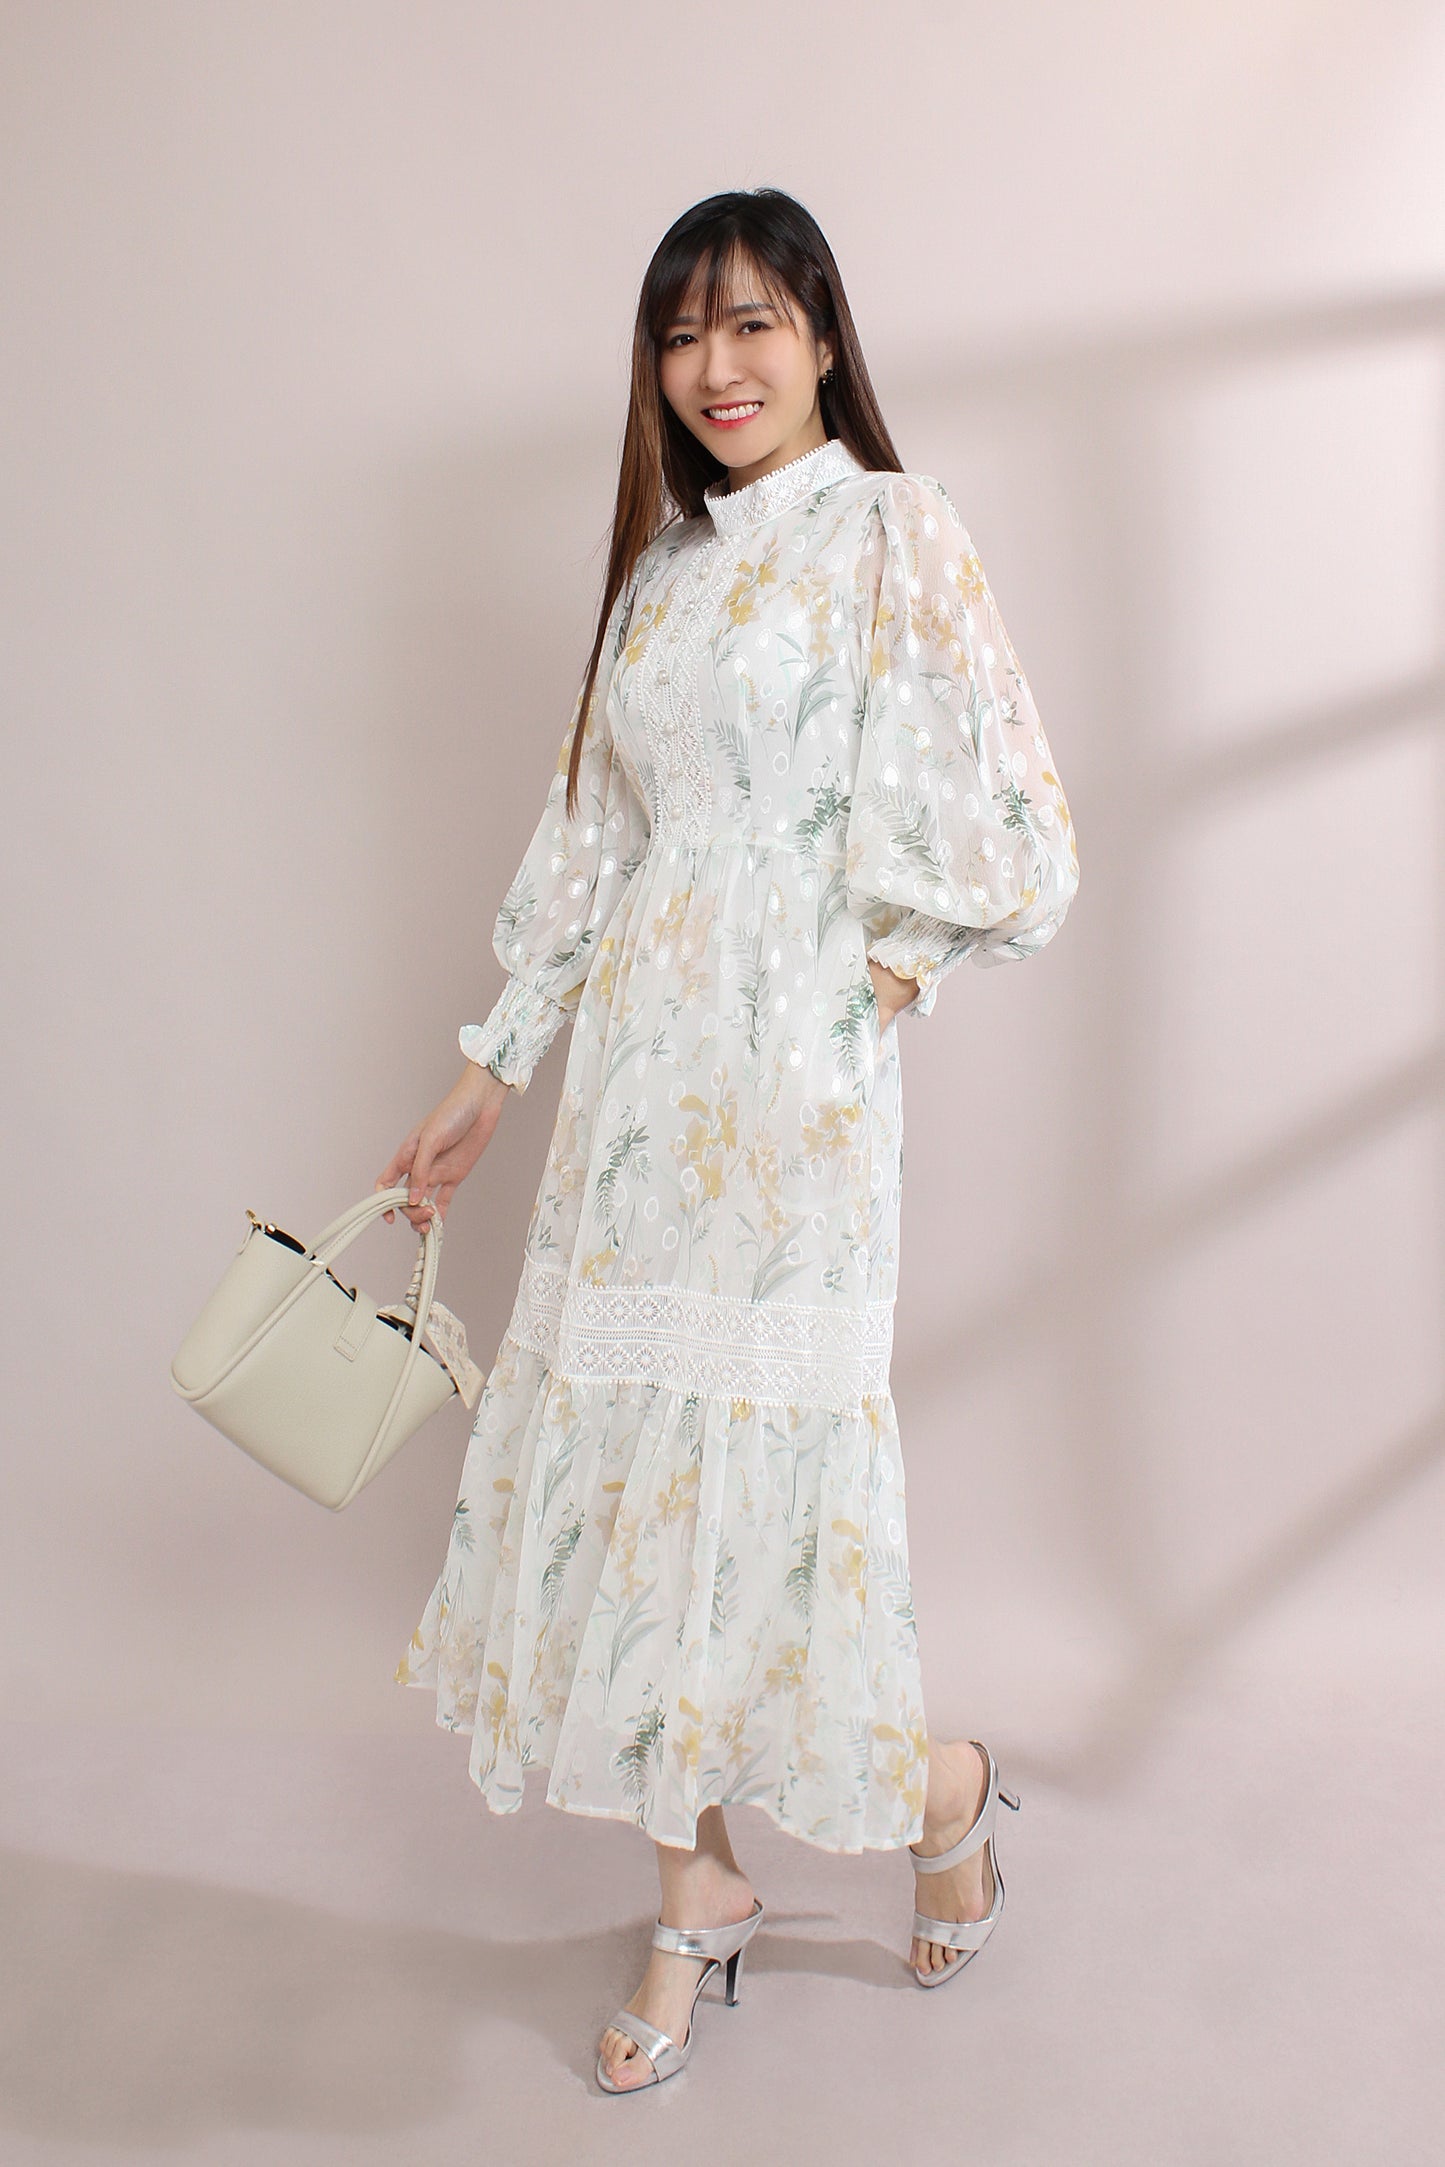 Aphaea Blooming Lace Dress